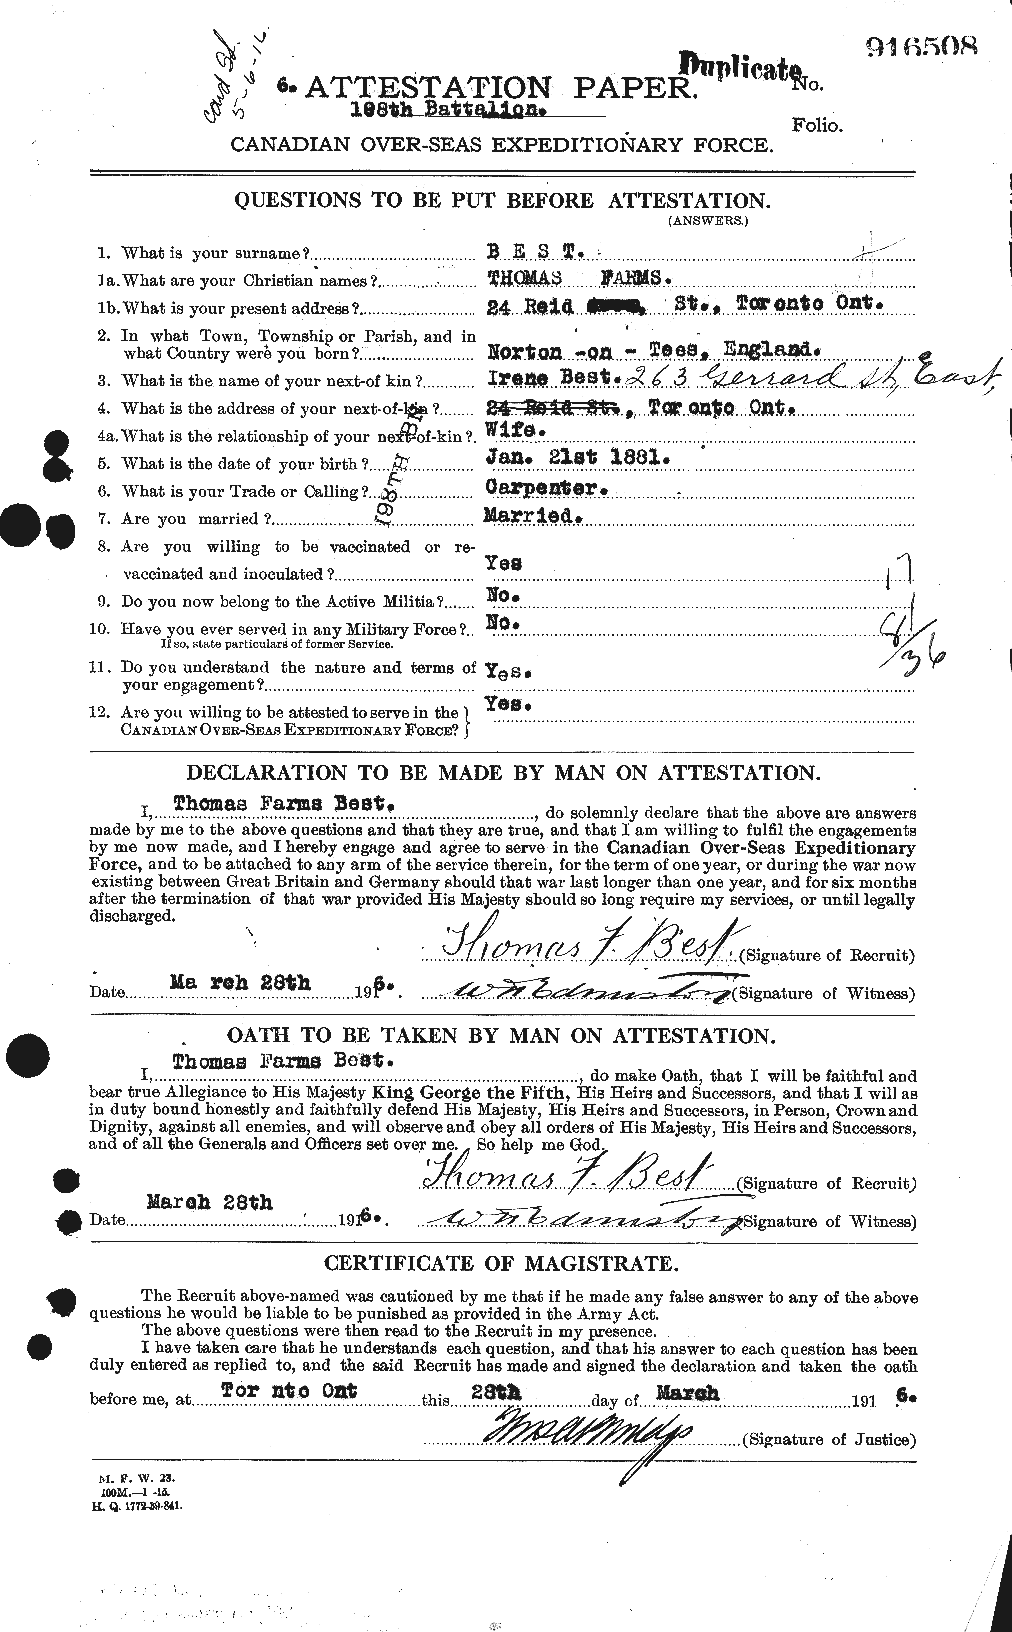 Personnel Records of the First World War - CEF 236885a